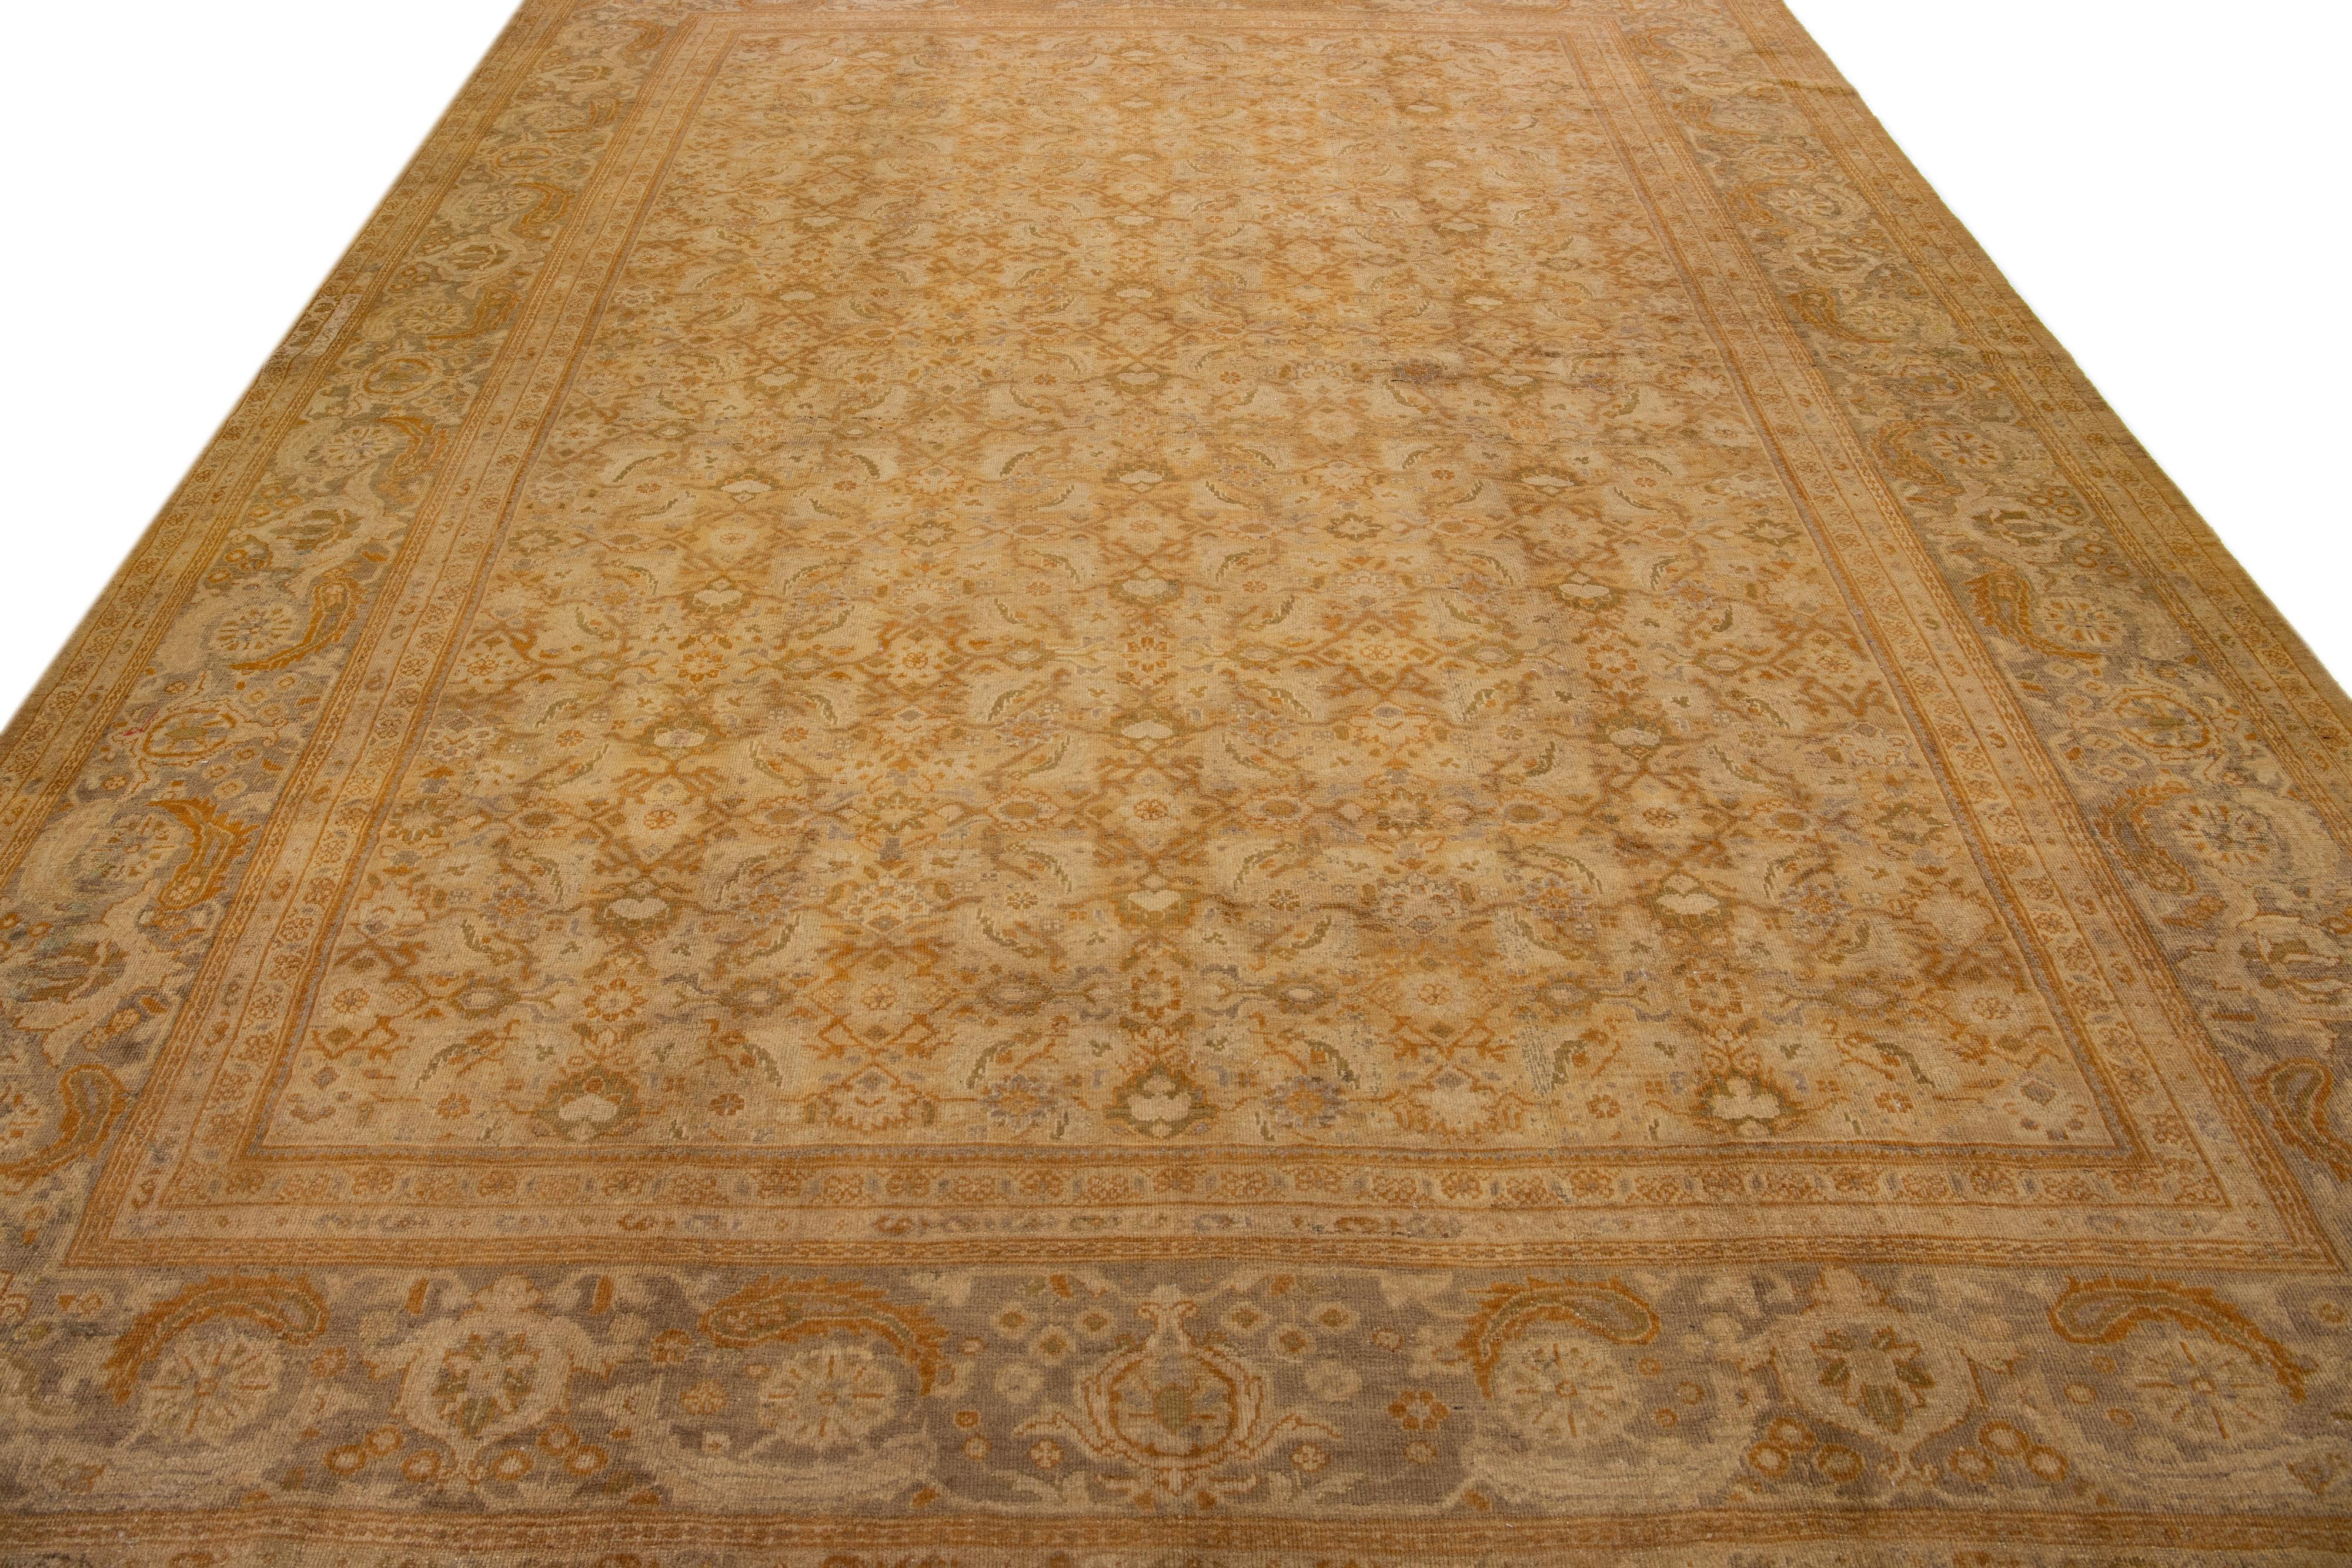 Islamic Antique Sultanabad Handmade Tan Wool Rug with Allover Floral Design For Sale